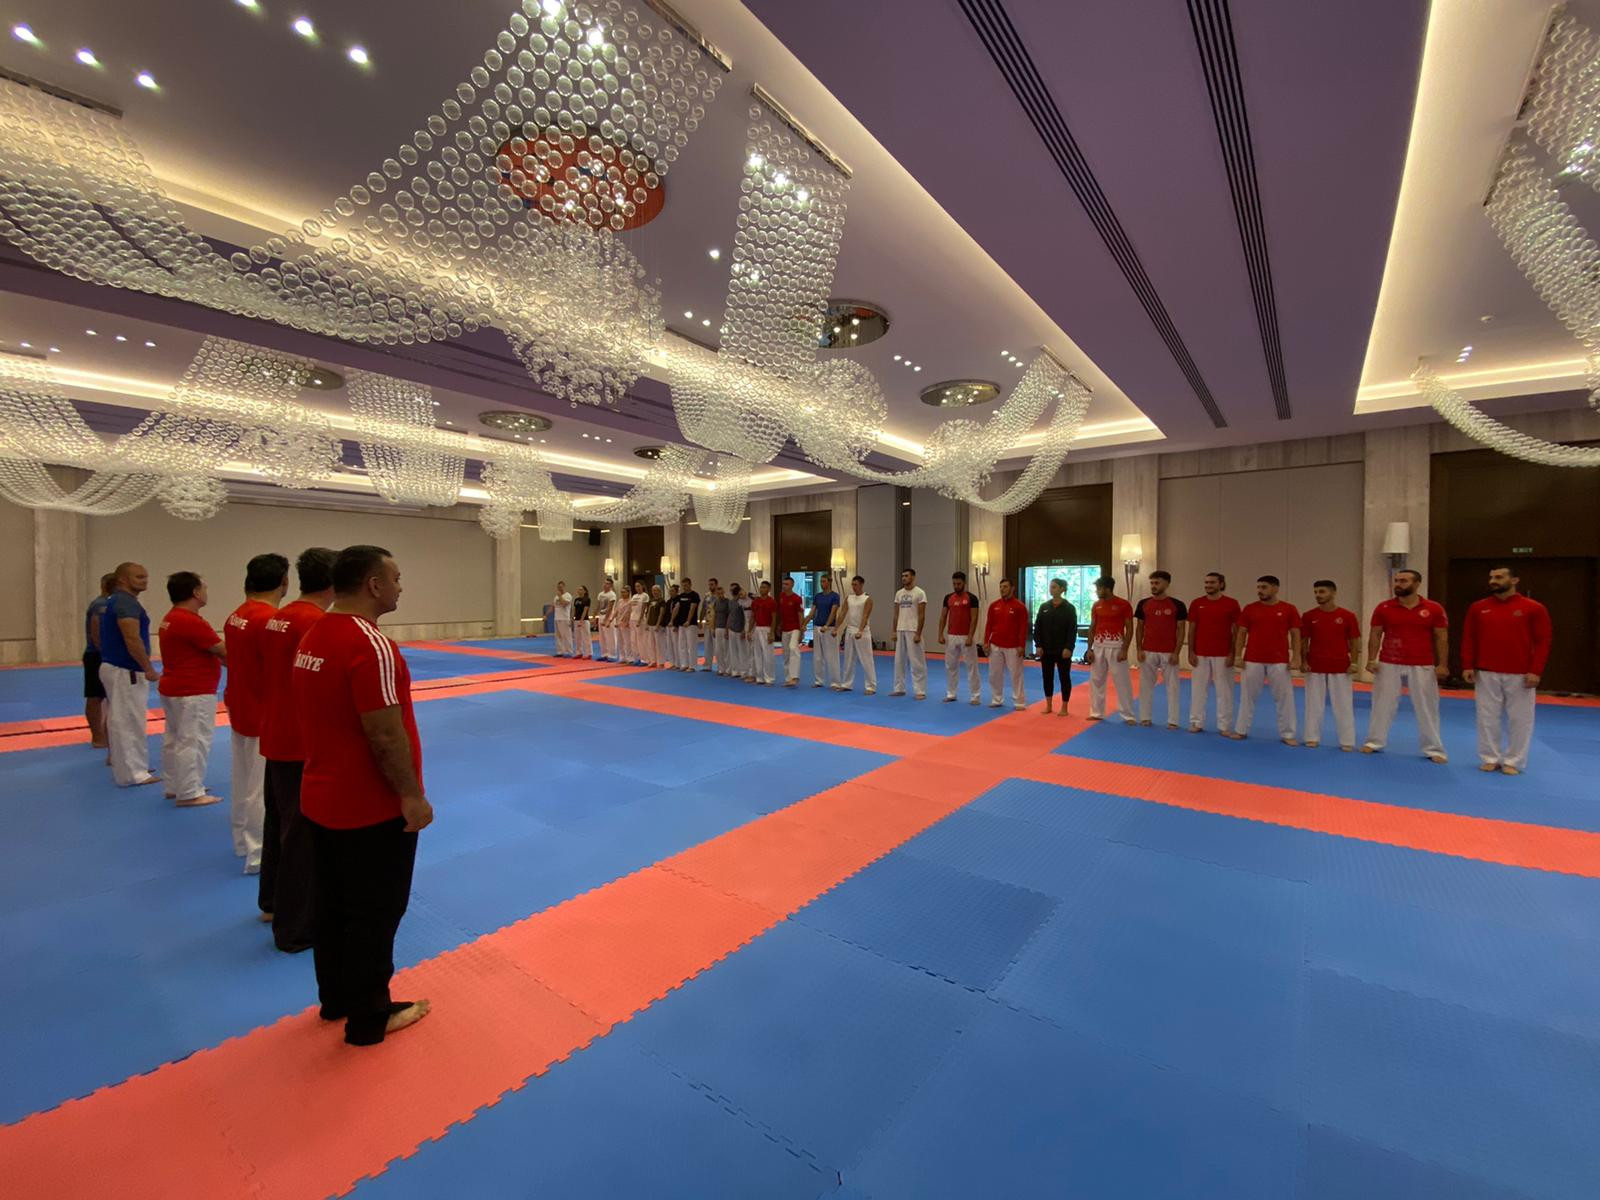 Turkey and Ukraine hold joint karate camp as "new normal" period continues